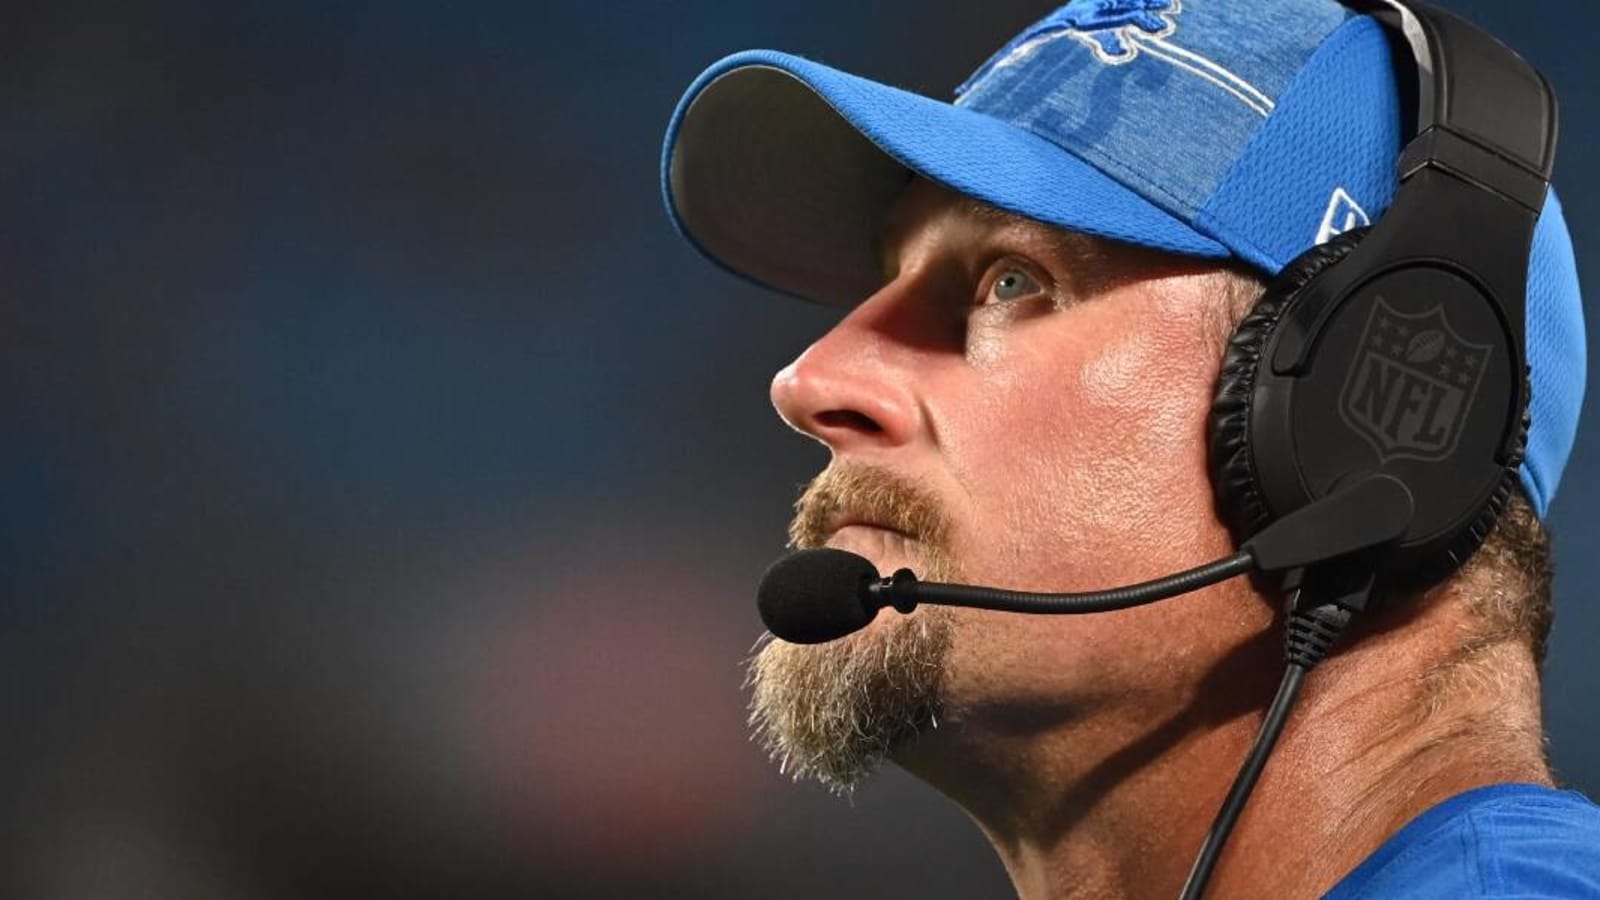 Dan Campbell reacts to ‘America’s Team’ moniker being placed on Detroit Lions